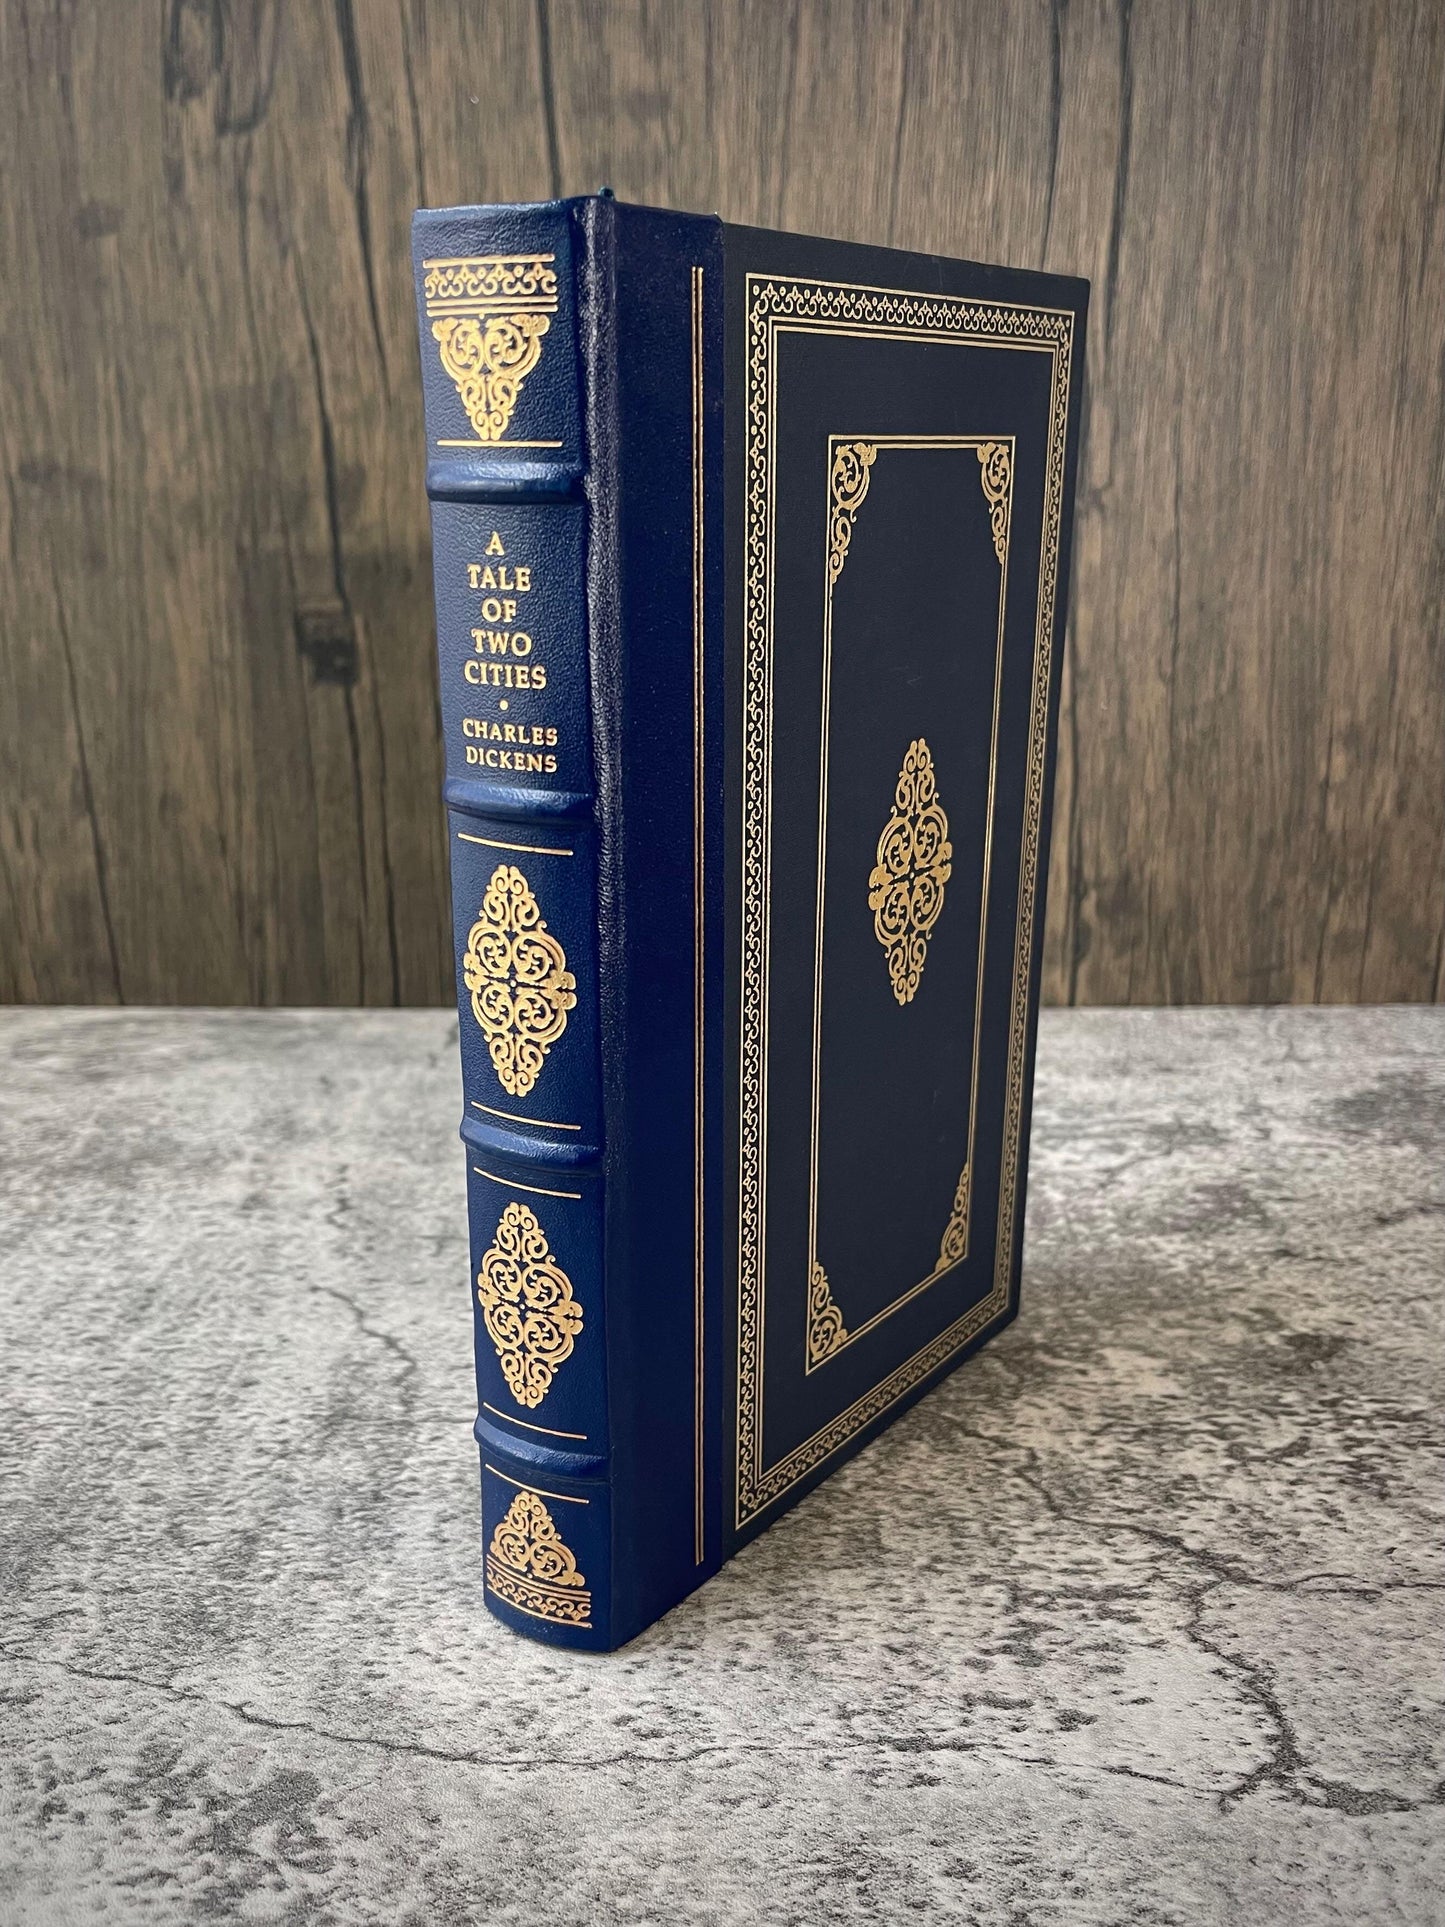 A Tale of Two Cities / The Franklin Library / Quarter Bound Leather / 1983 - Precious Cache